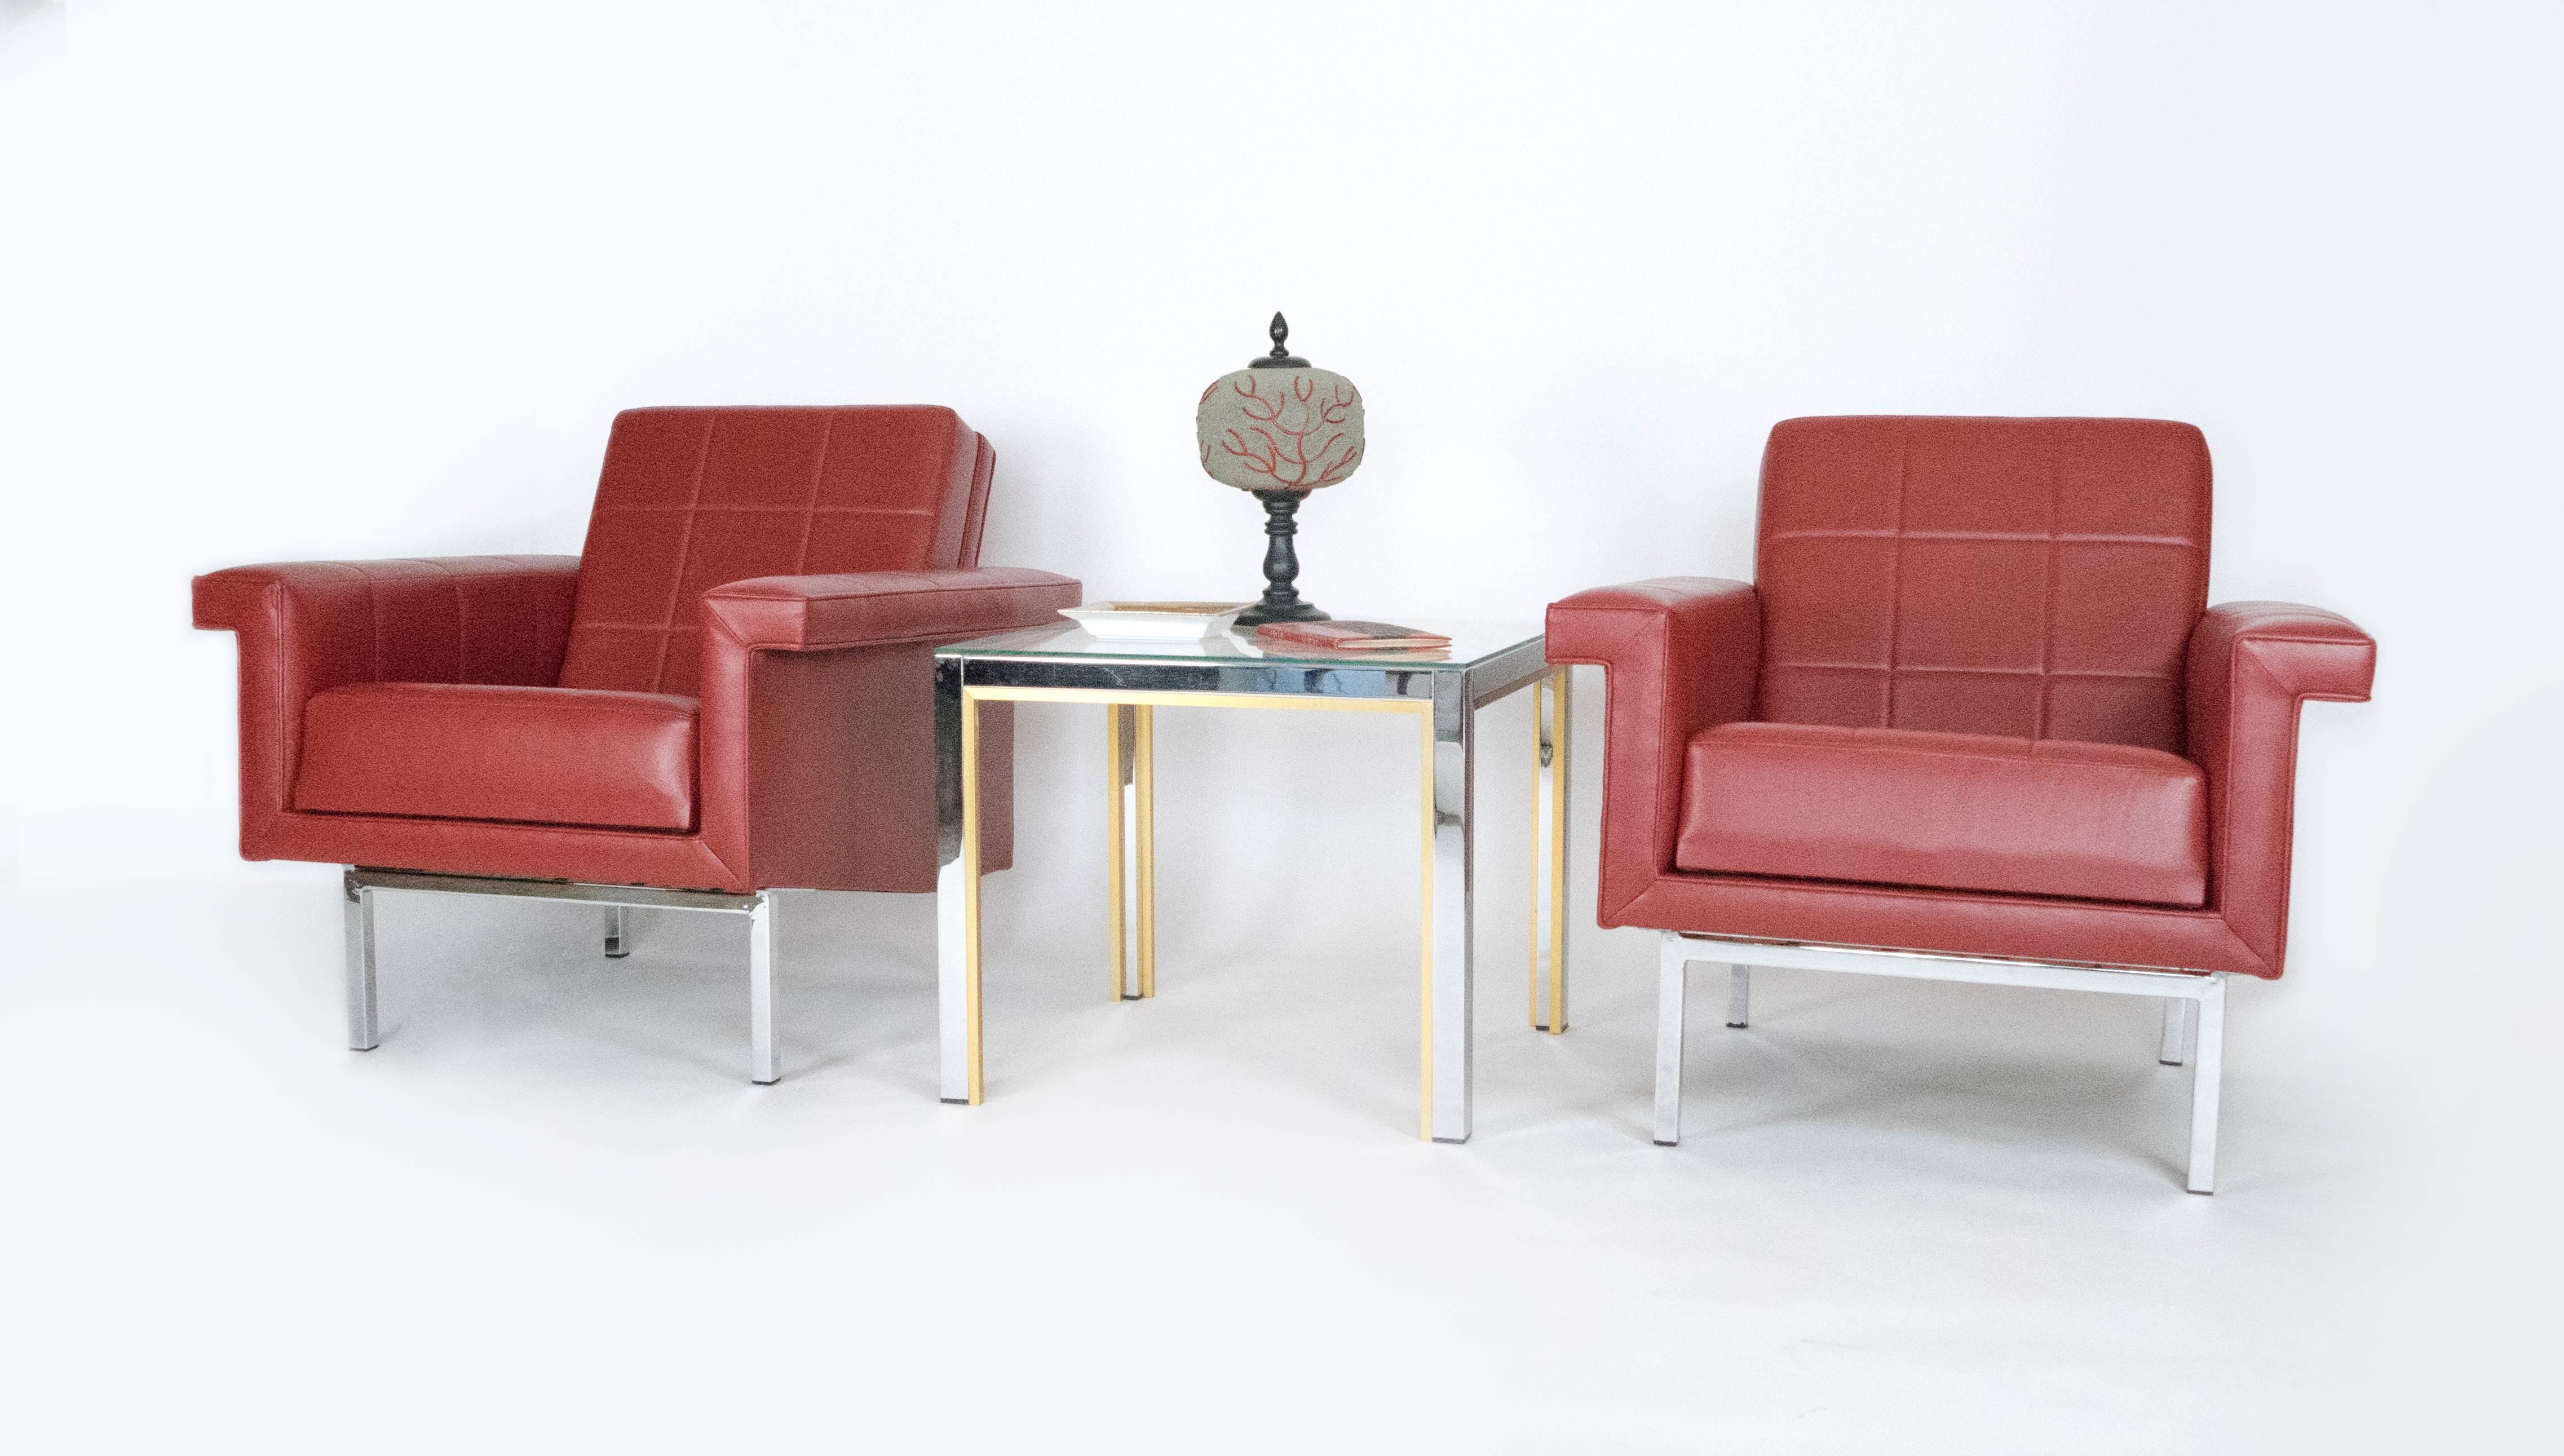 The lines of these deep seated armchairs are clean and modern, the chairs are very comfortable. The quilted design and the chromed angular legs bring to mind the French 1970s design. These arm chairs have been upholstered in a chili colored leather.